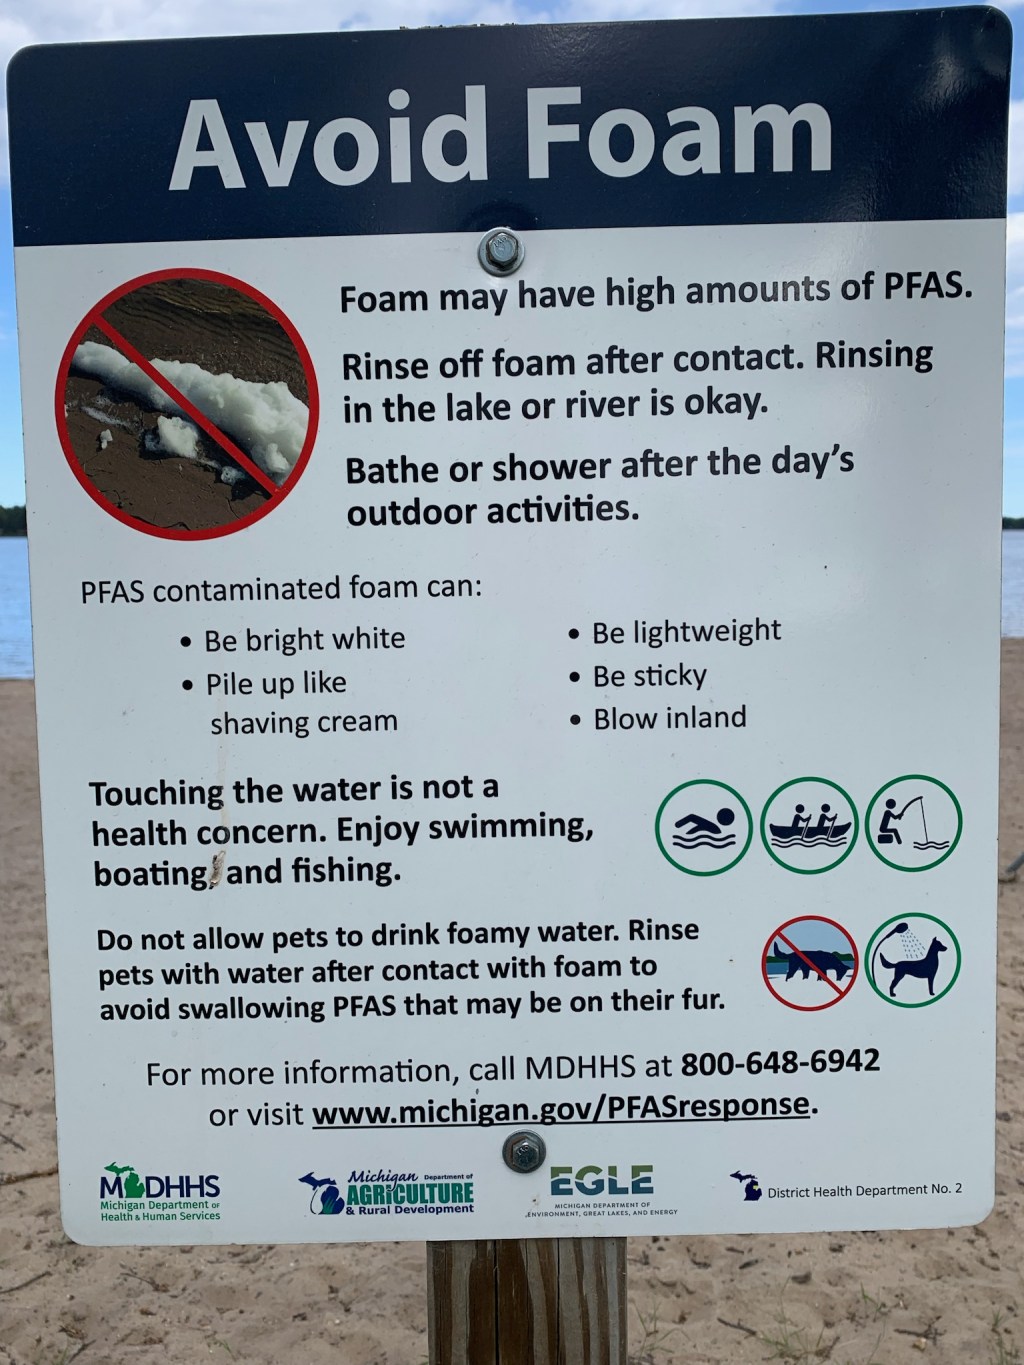 A sign is posted at a Van Etten Lake public beach in Oscoda, Michigan. It reads, "Avoid Foam / Foam may have high amounts of PFAS. Rinse off foam after contact. Rinsing in the lake or river is okay. Bathe or shower after the day's outdoor activities. / PFAS contaminated foam can be: Bright white; Pile up like shaving cream; Be lightweight; Be sticky; Blow inland / Touching the water is not a health concern. Enjoy swimming, boating, and fishing. / Do not allow pets to drink foamy water. Rinse pets with water after contact with foam to void swallowing PFAS that may be on their fur." It includes contact information at the bottom of the the sign.